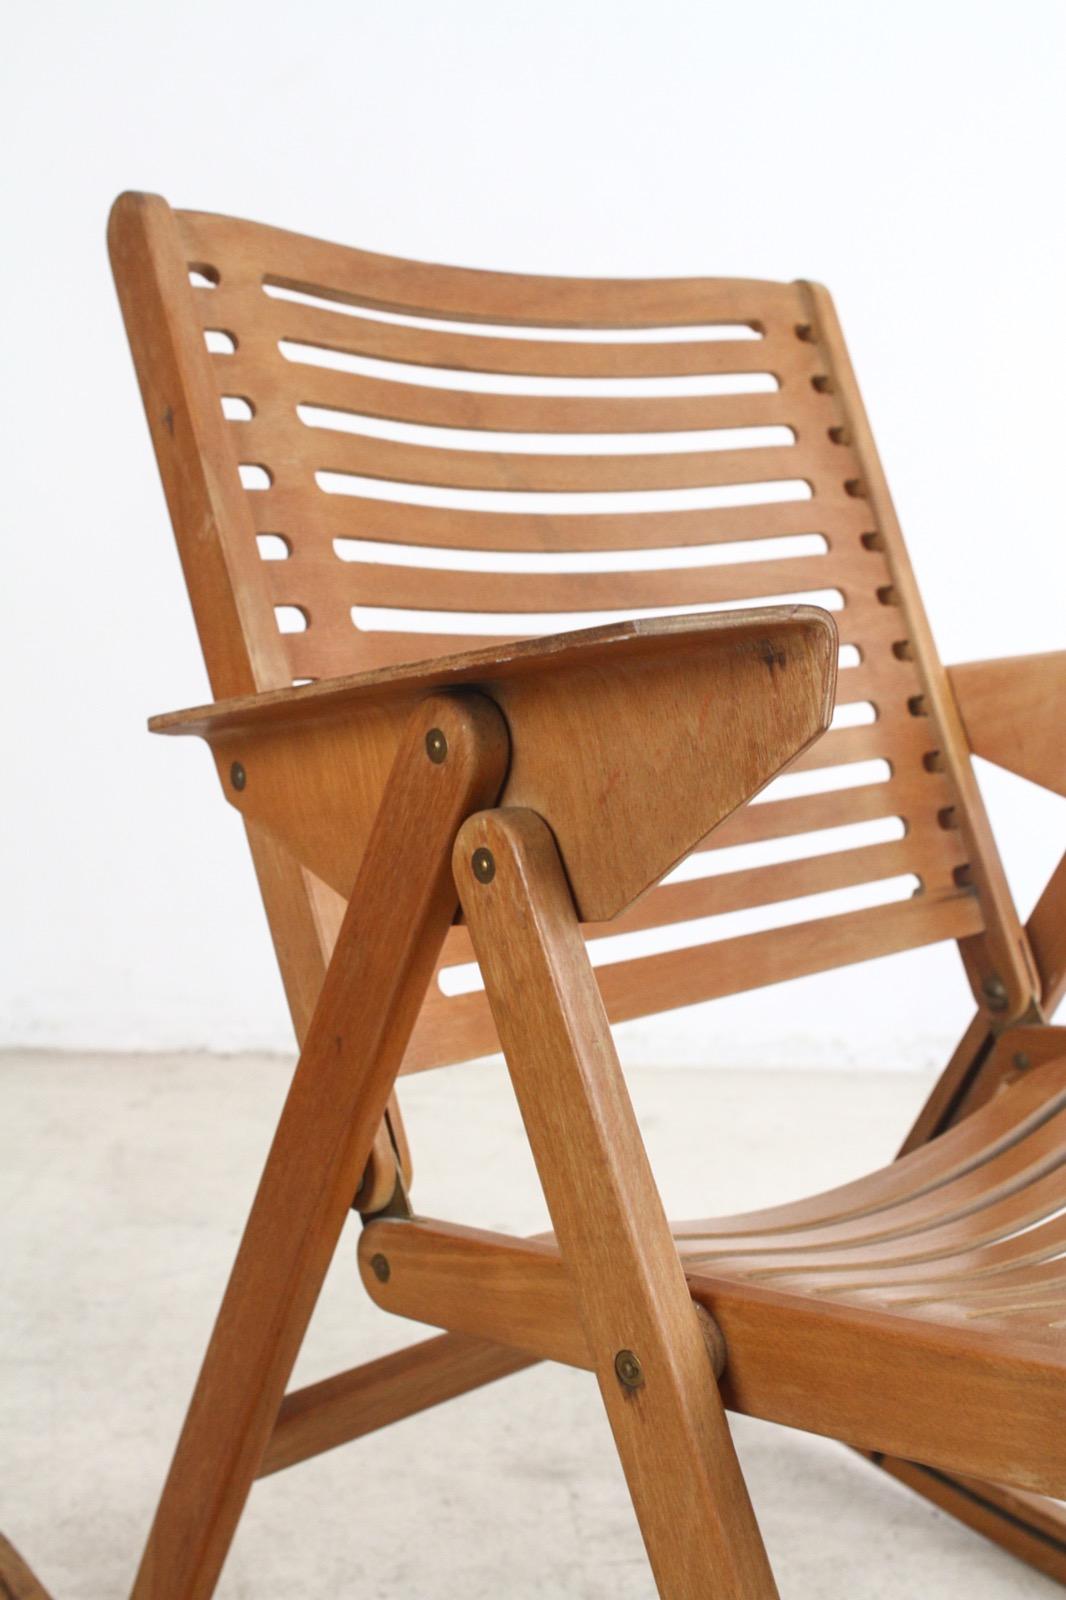 This model Rex folding rocking chair was designed by Niko Kralj in Slovenia in 1952, with this particular piece thought to have been produced during the 1970s. The chair is made of light beech and remains in nice vintage condition with a tiny